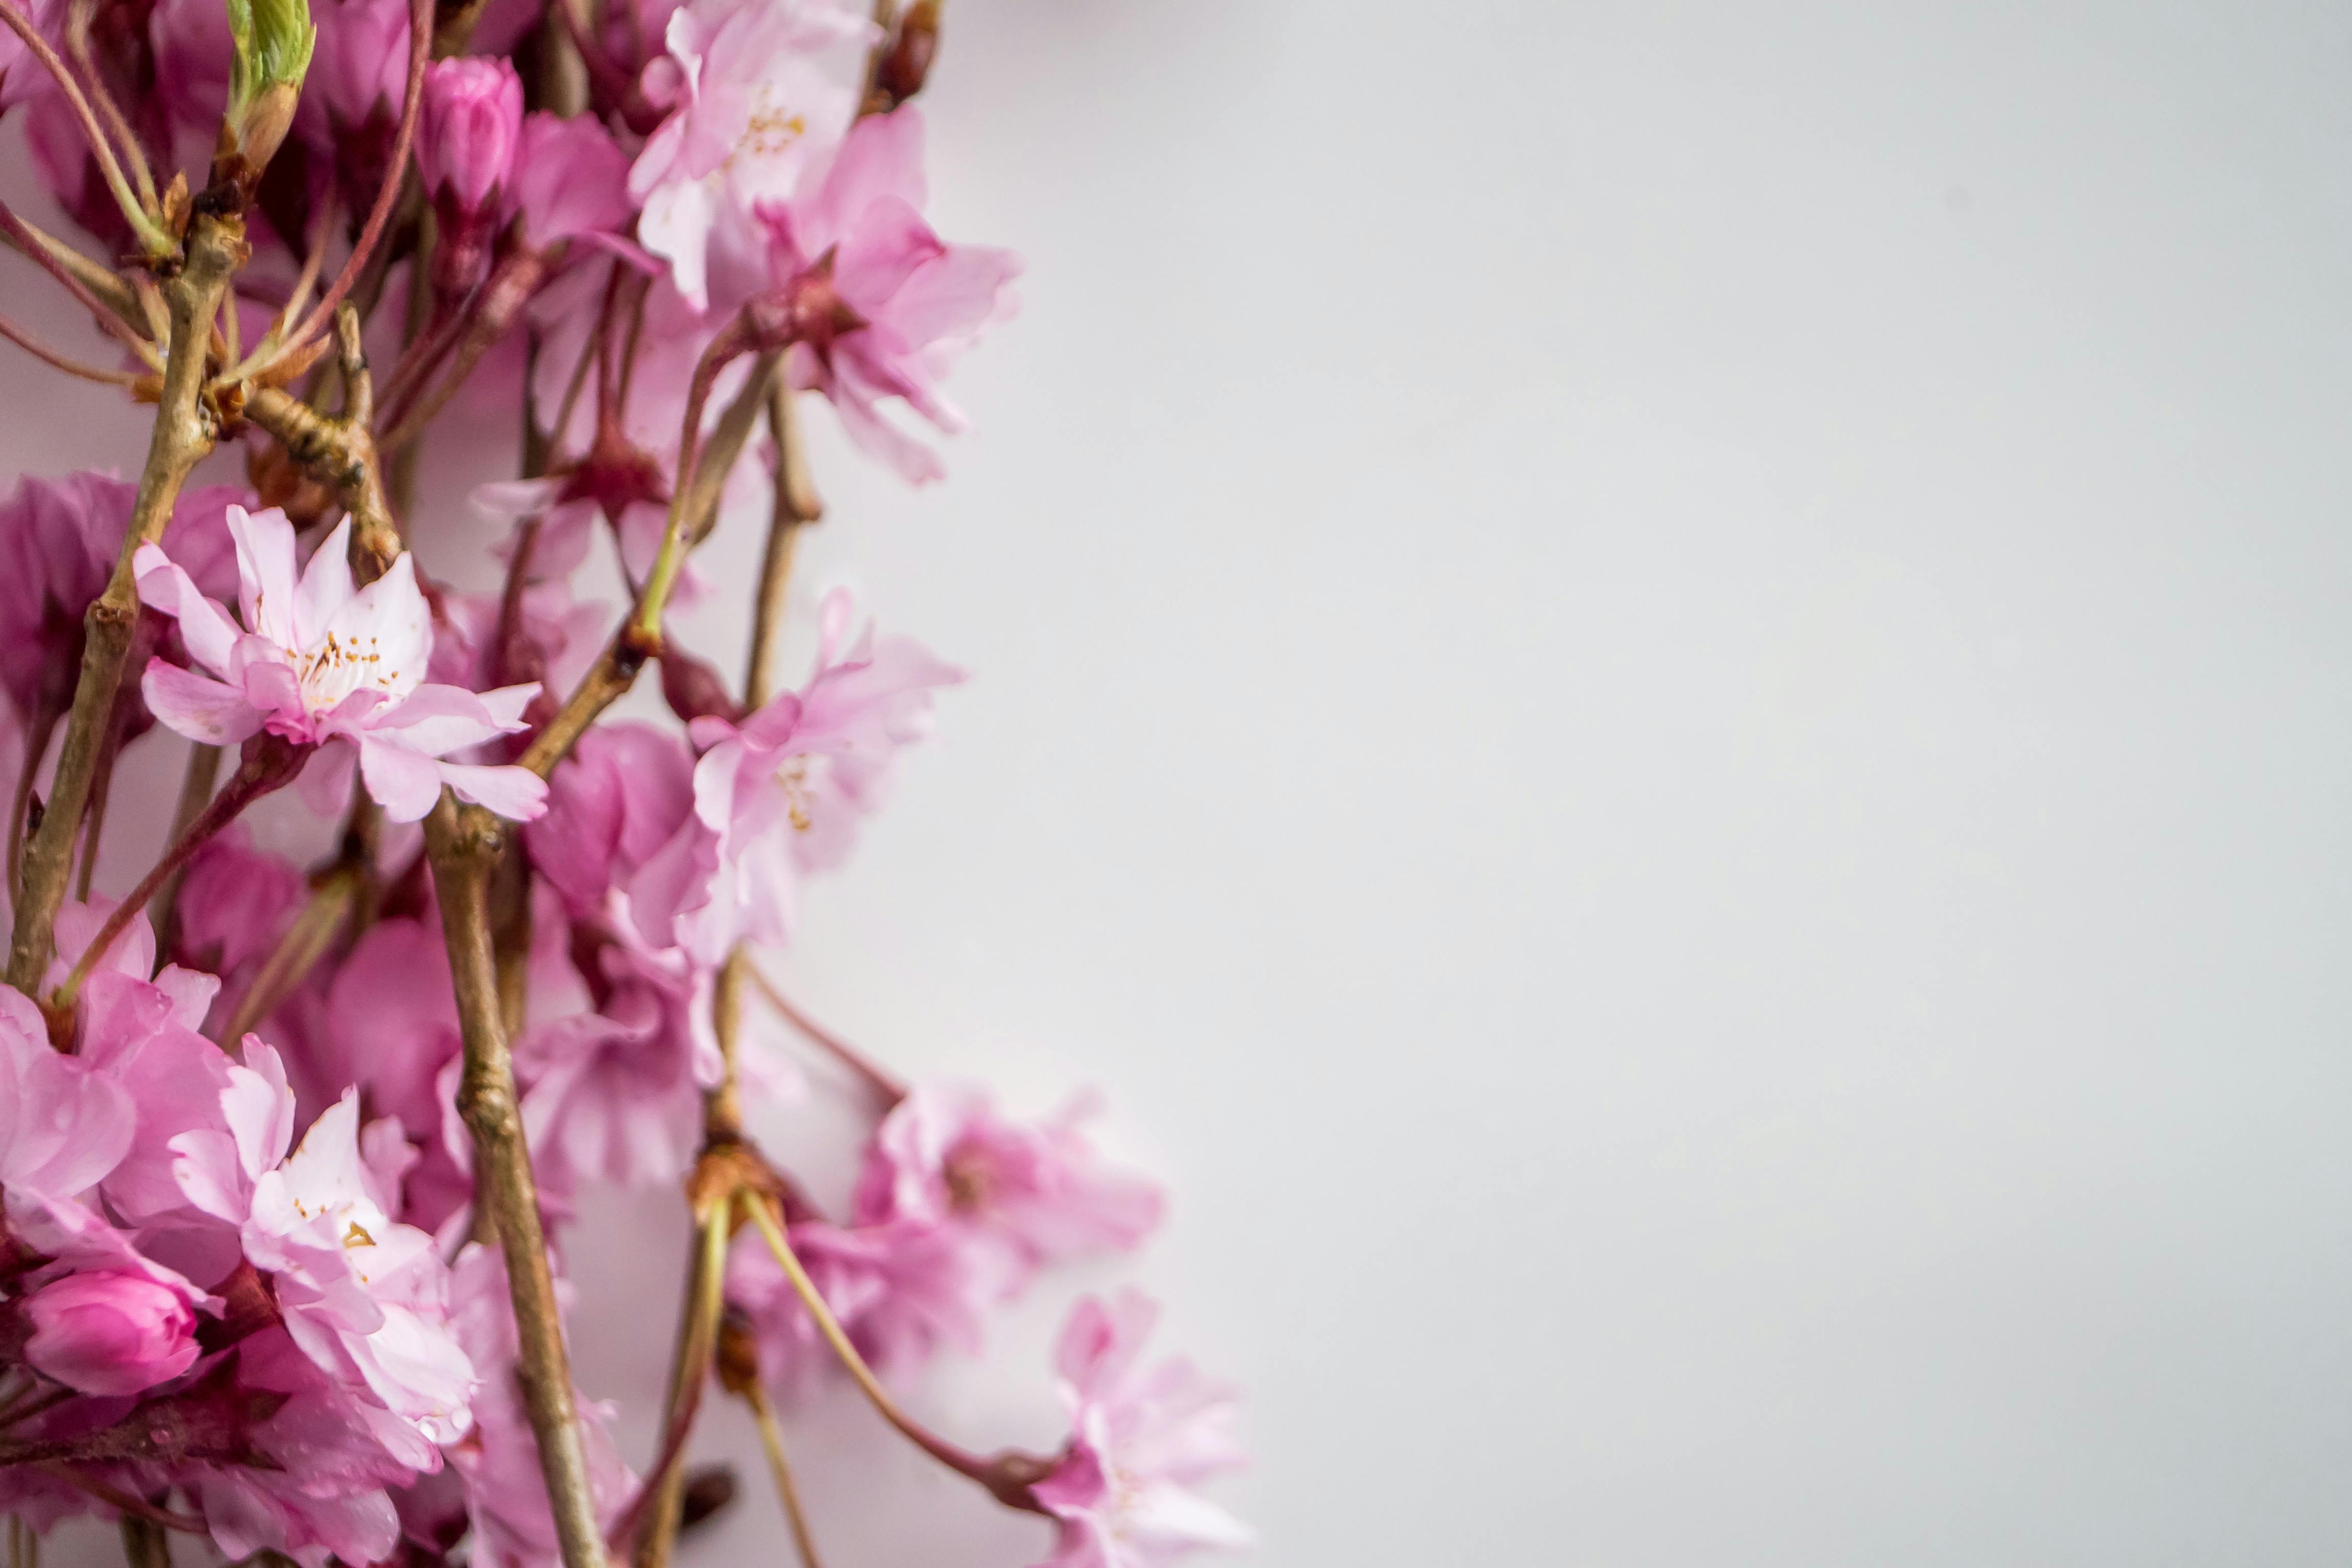 Bunch of tender pink cherry flowers on white background · Free Stock Photo